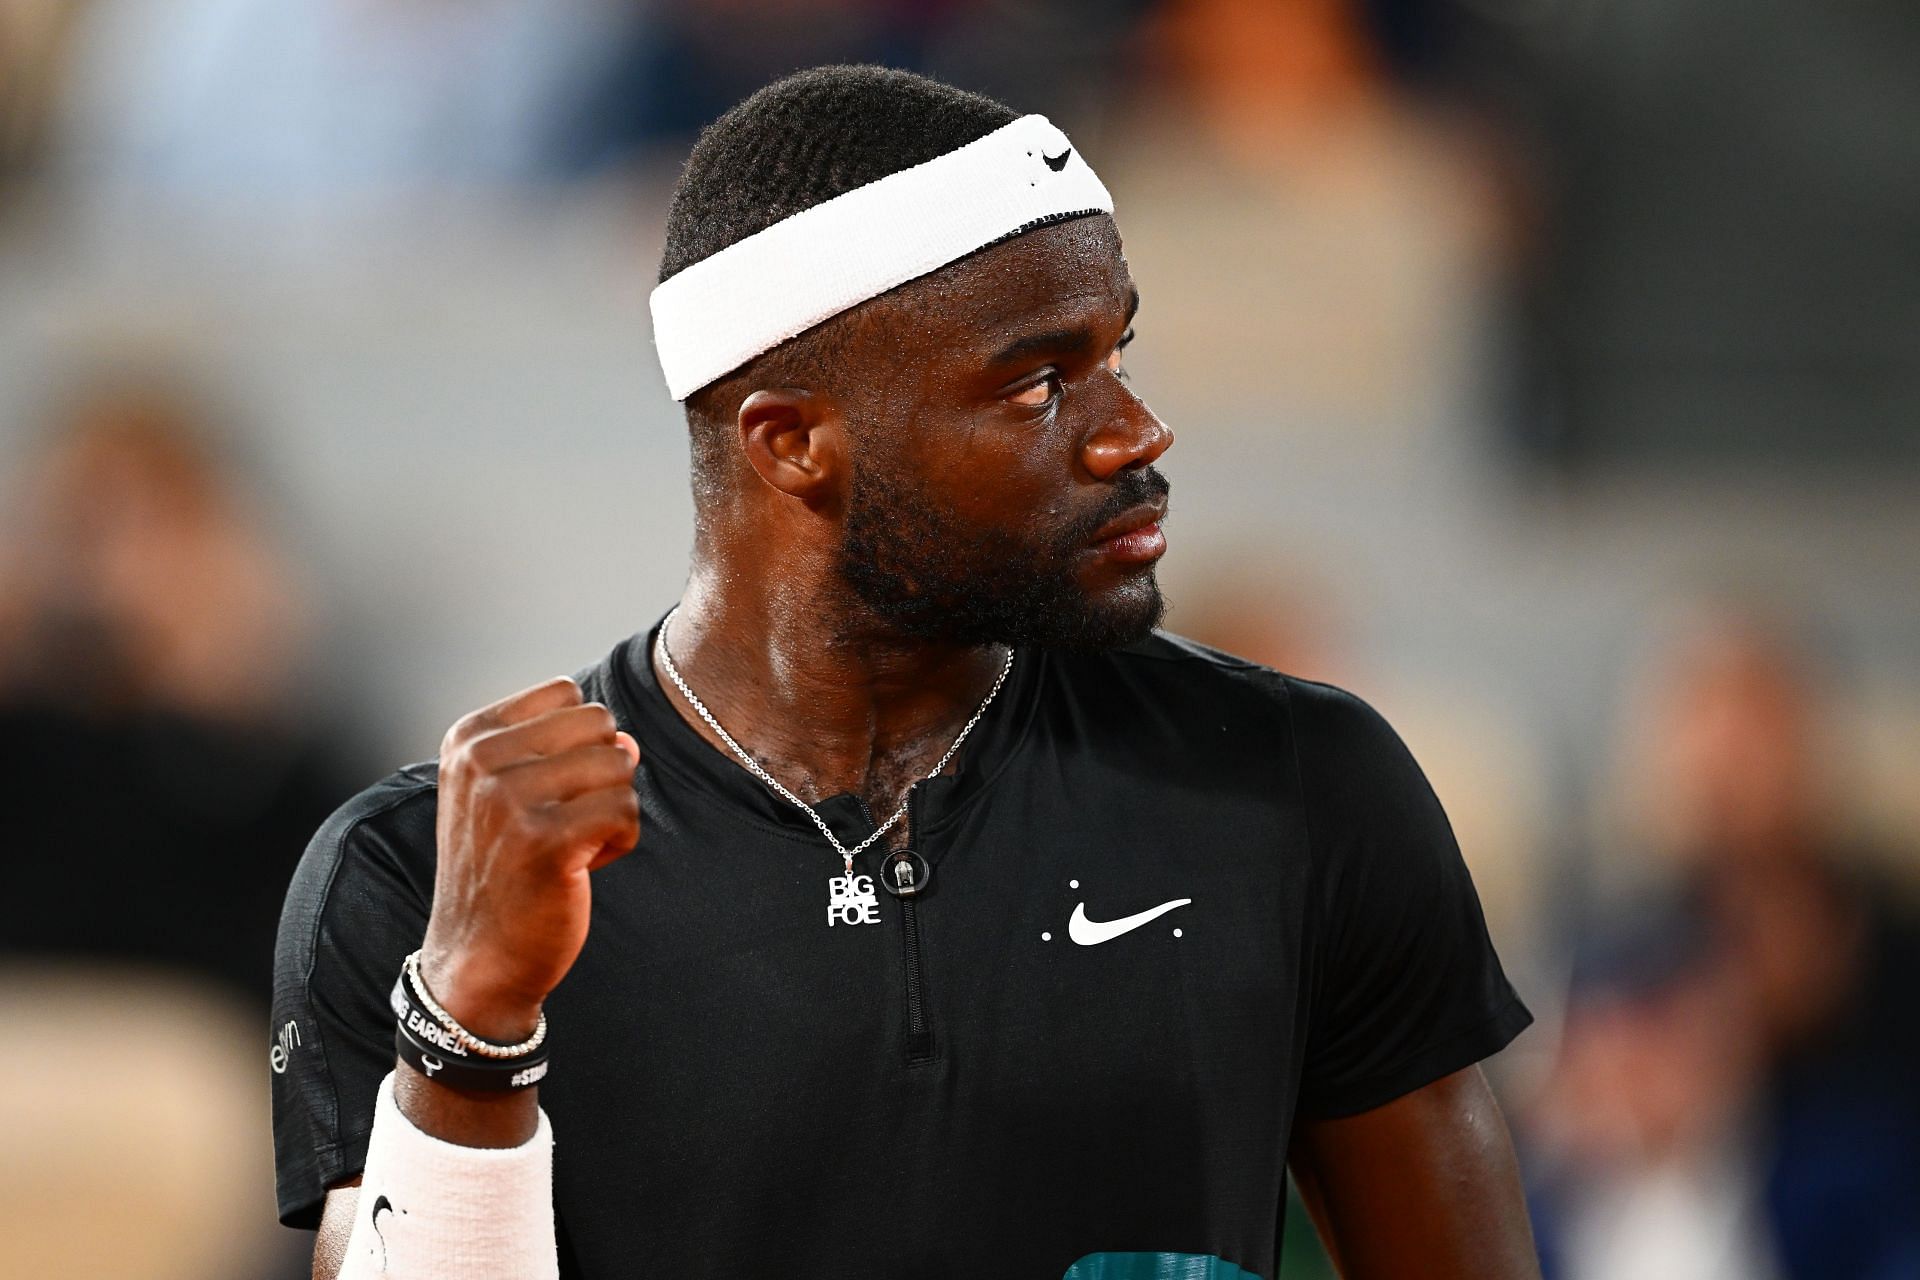 Frances Tiafoe during the French Open